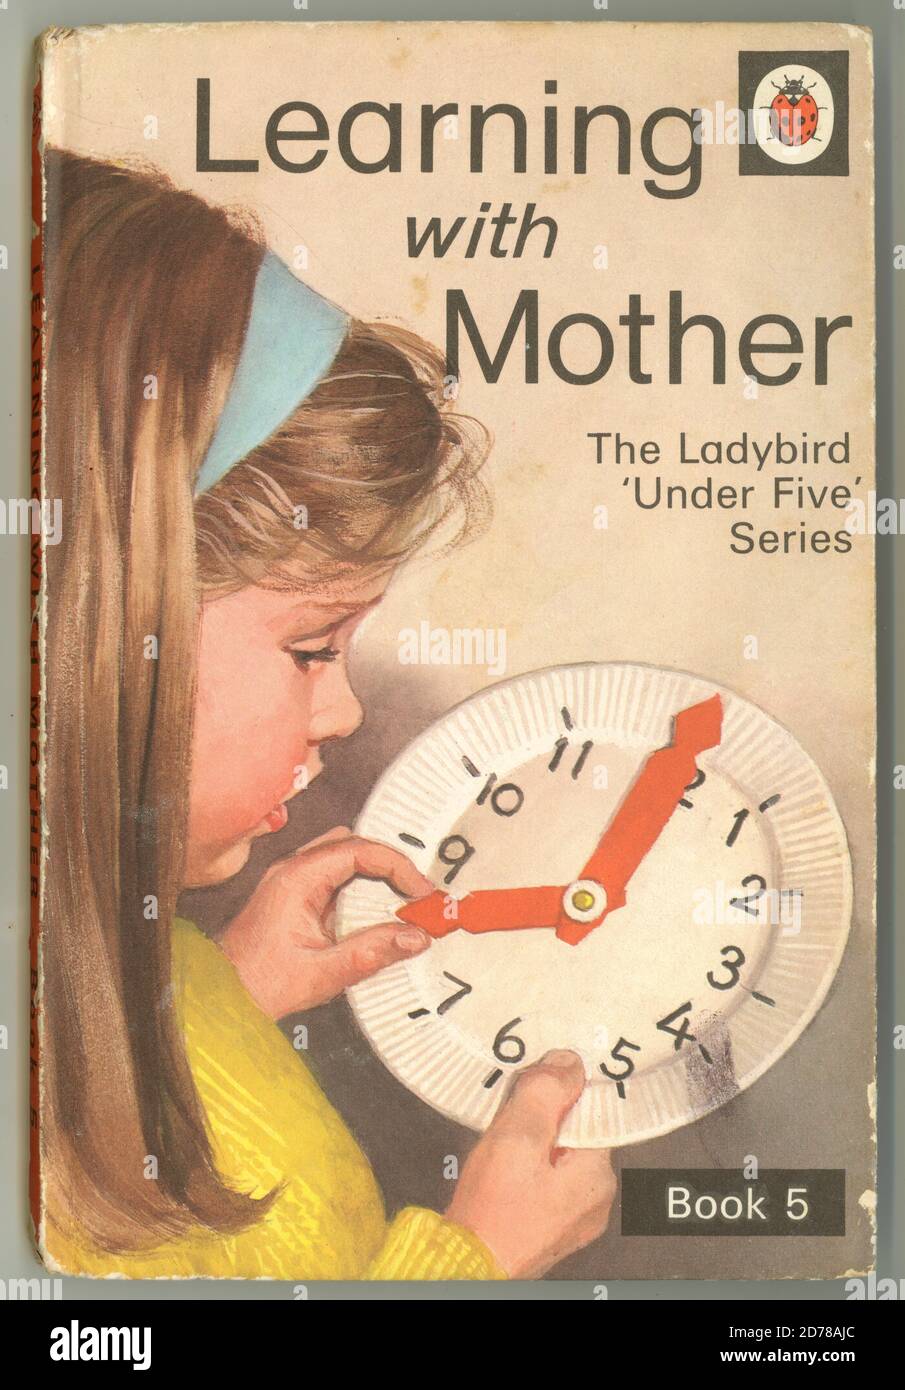 Typical original Ladybird book cover - Learning with Mother book 5, Under Five series, published in 1972, Loughborough, England, U.K. Stock Photo